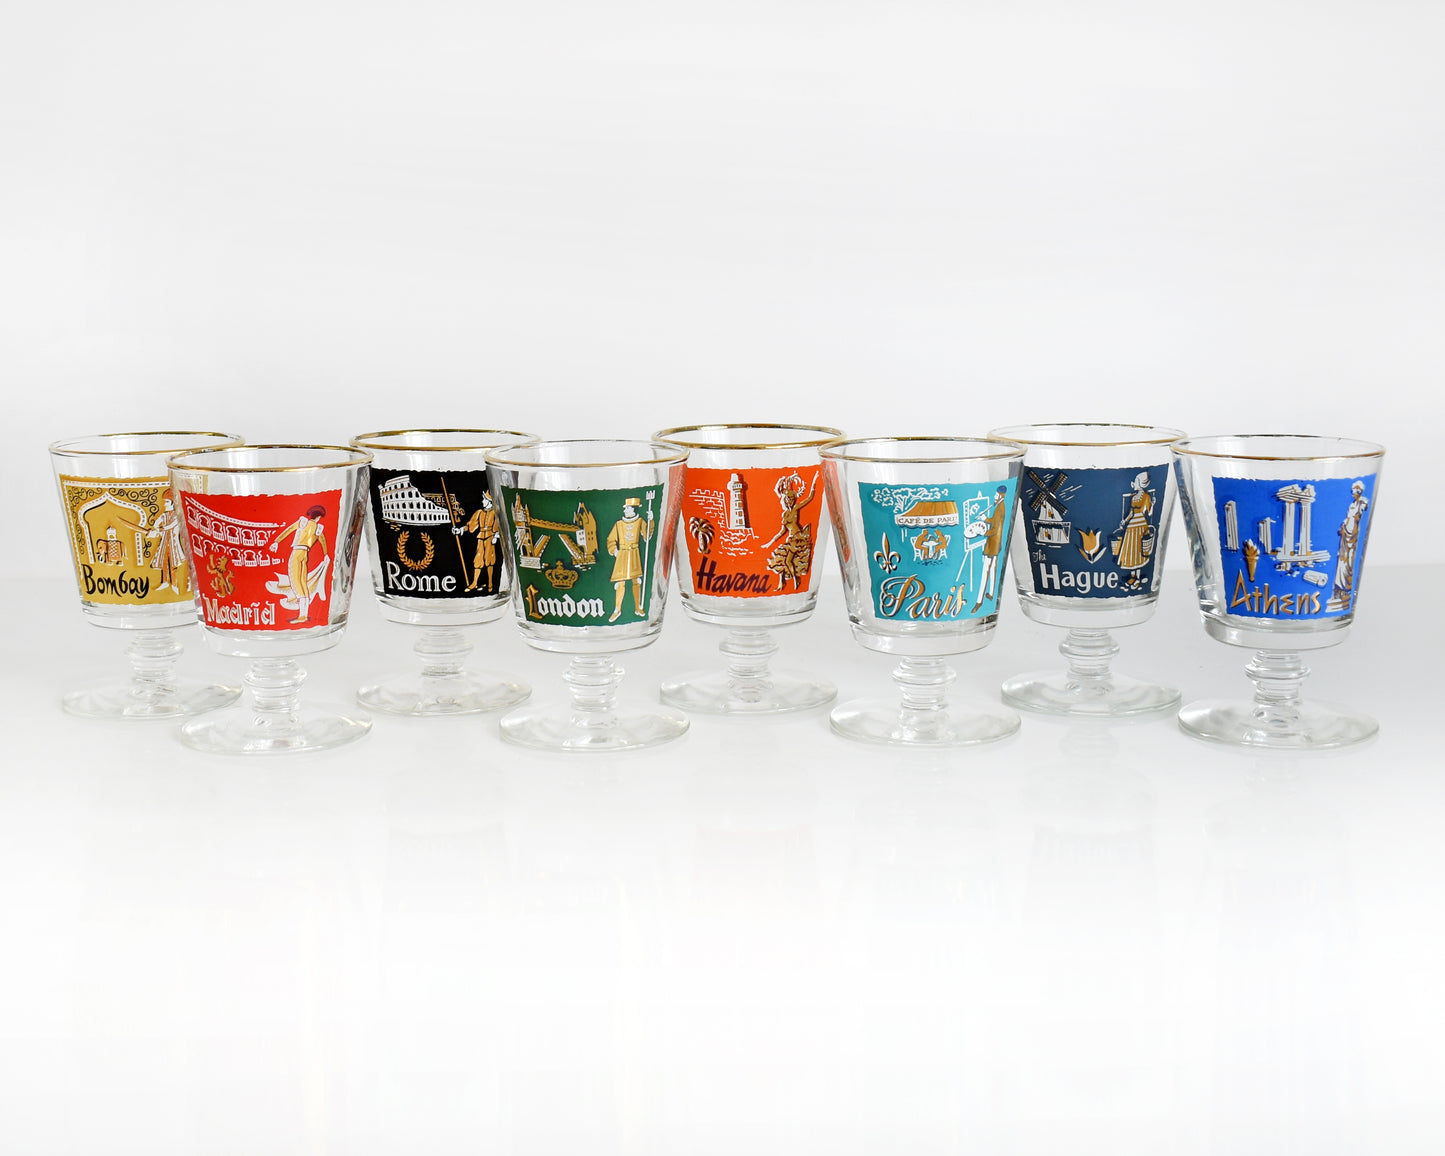 This Libbey International Set features 8 mid century city colorful glasses with distinct scenes, metallic gold/white accents. The glasses are Rome, Madrid, Bombay, Paris, Havana, Athens, London, The Hague